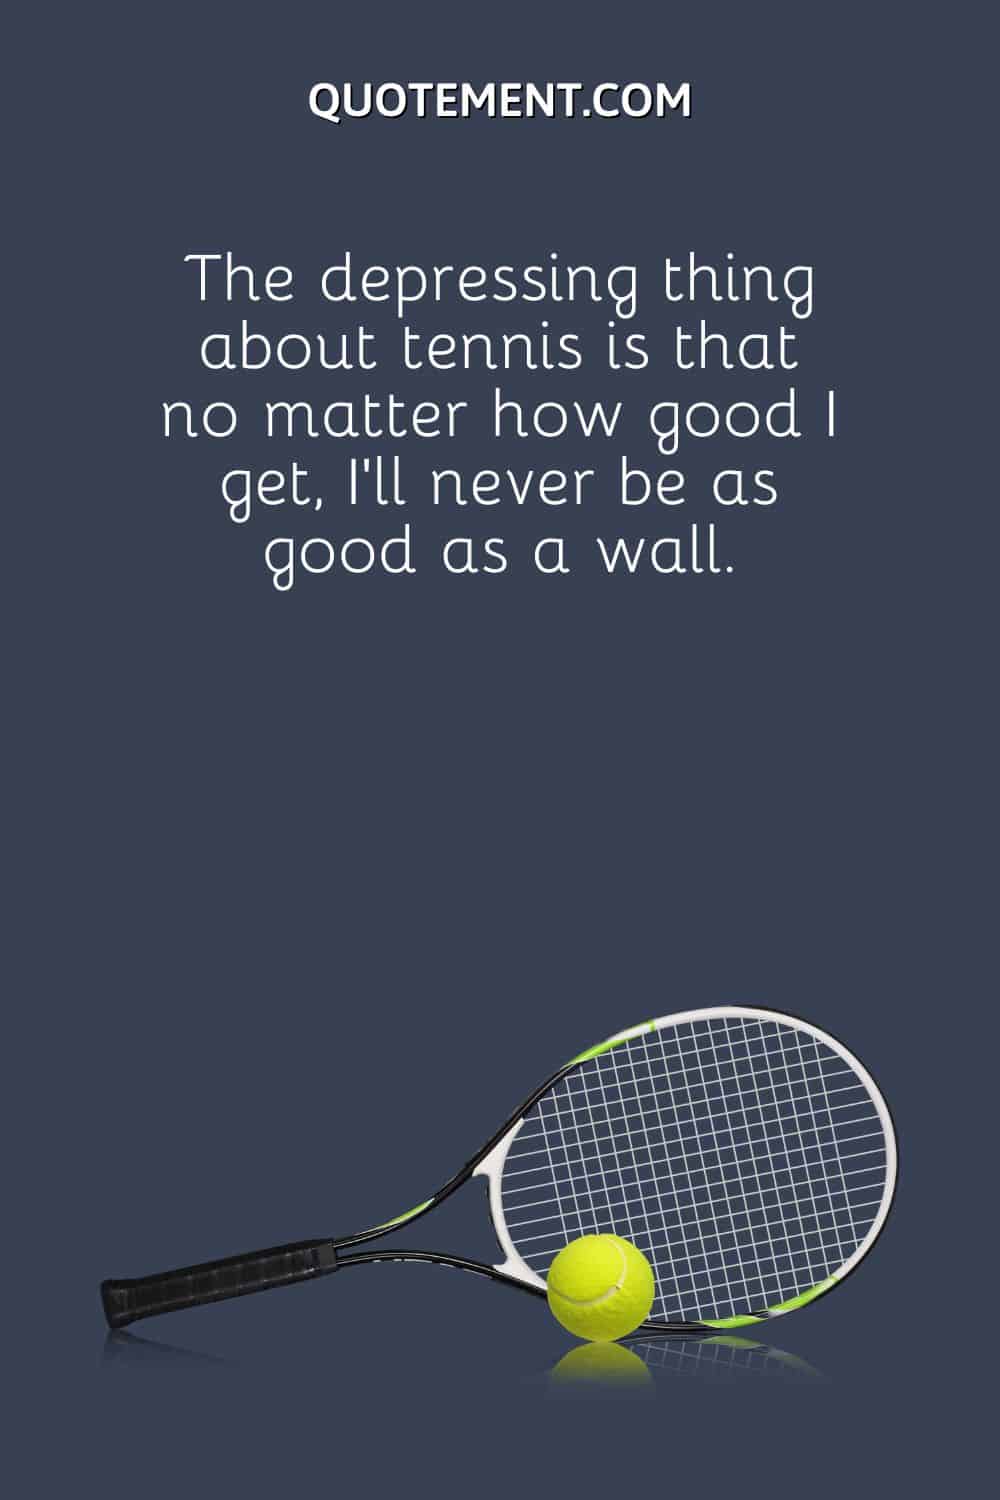 The depressing thing about tennis is that no matter how good I get, I’ll never be as good as a wall.